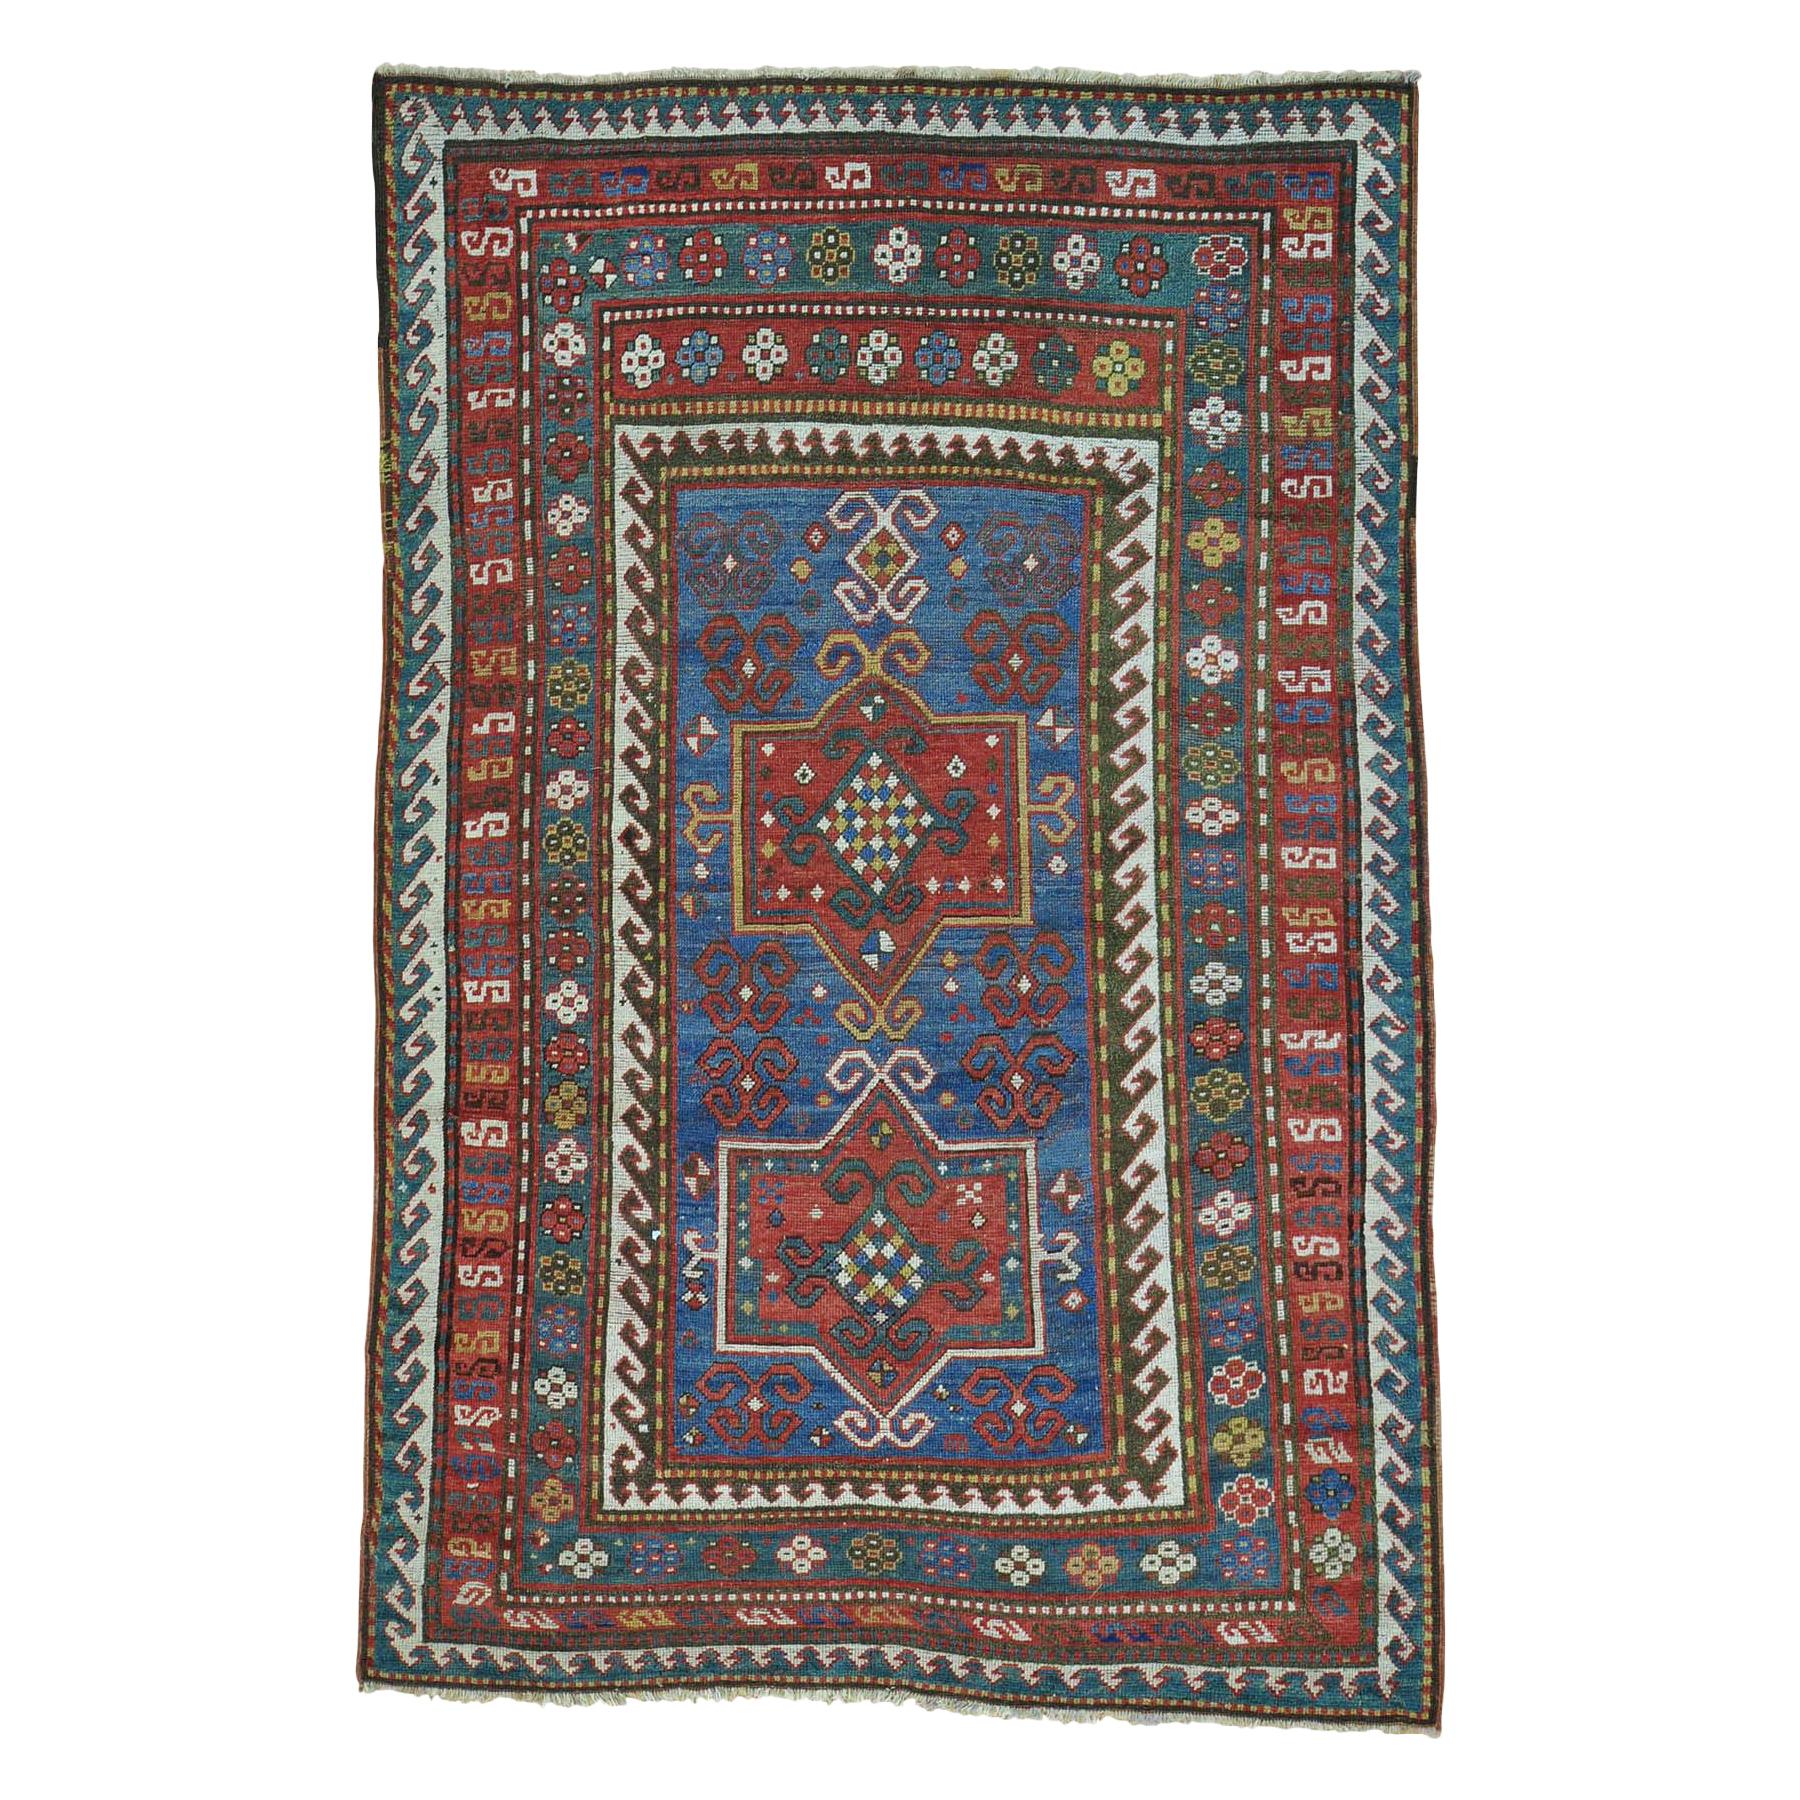 Early 20th Century Antique Caucasian Hand Knotted Rug - 4'8" x 7'2" For Sale